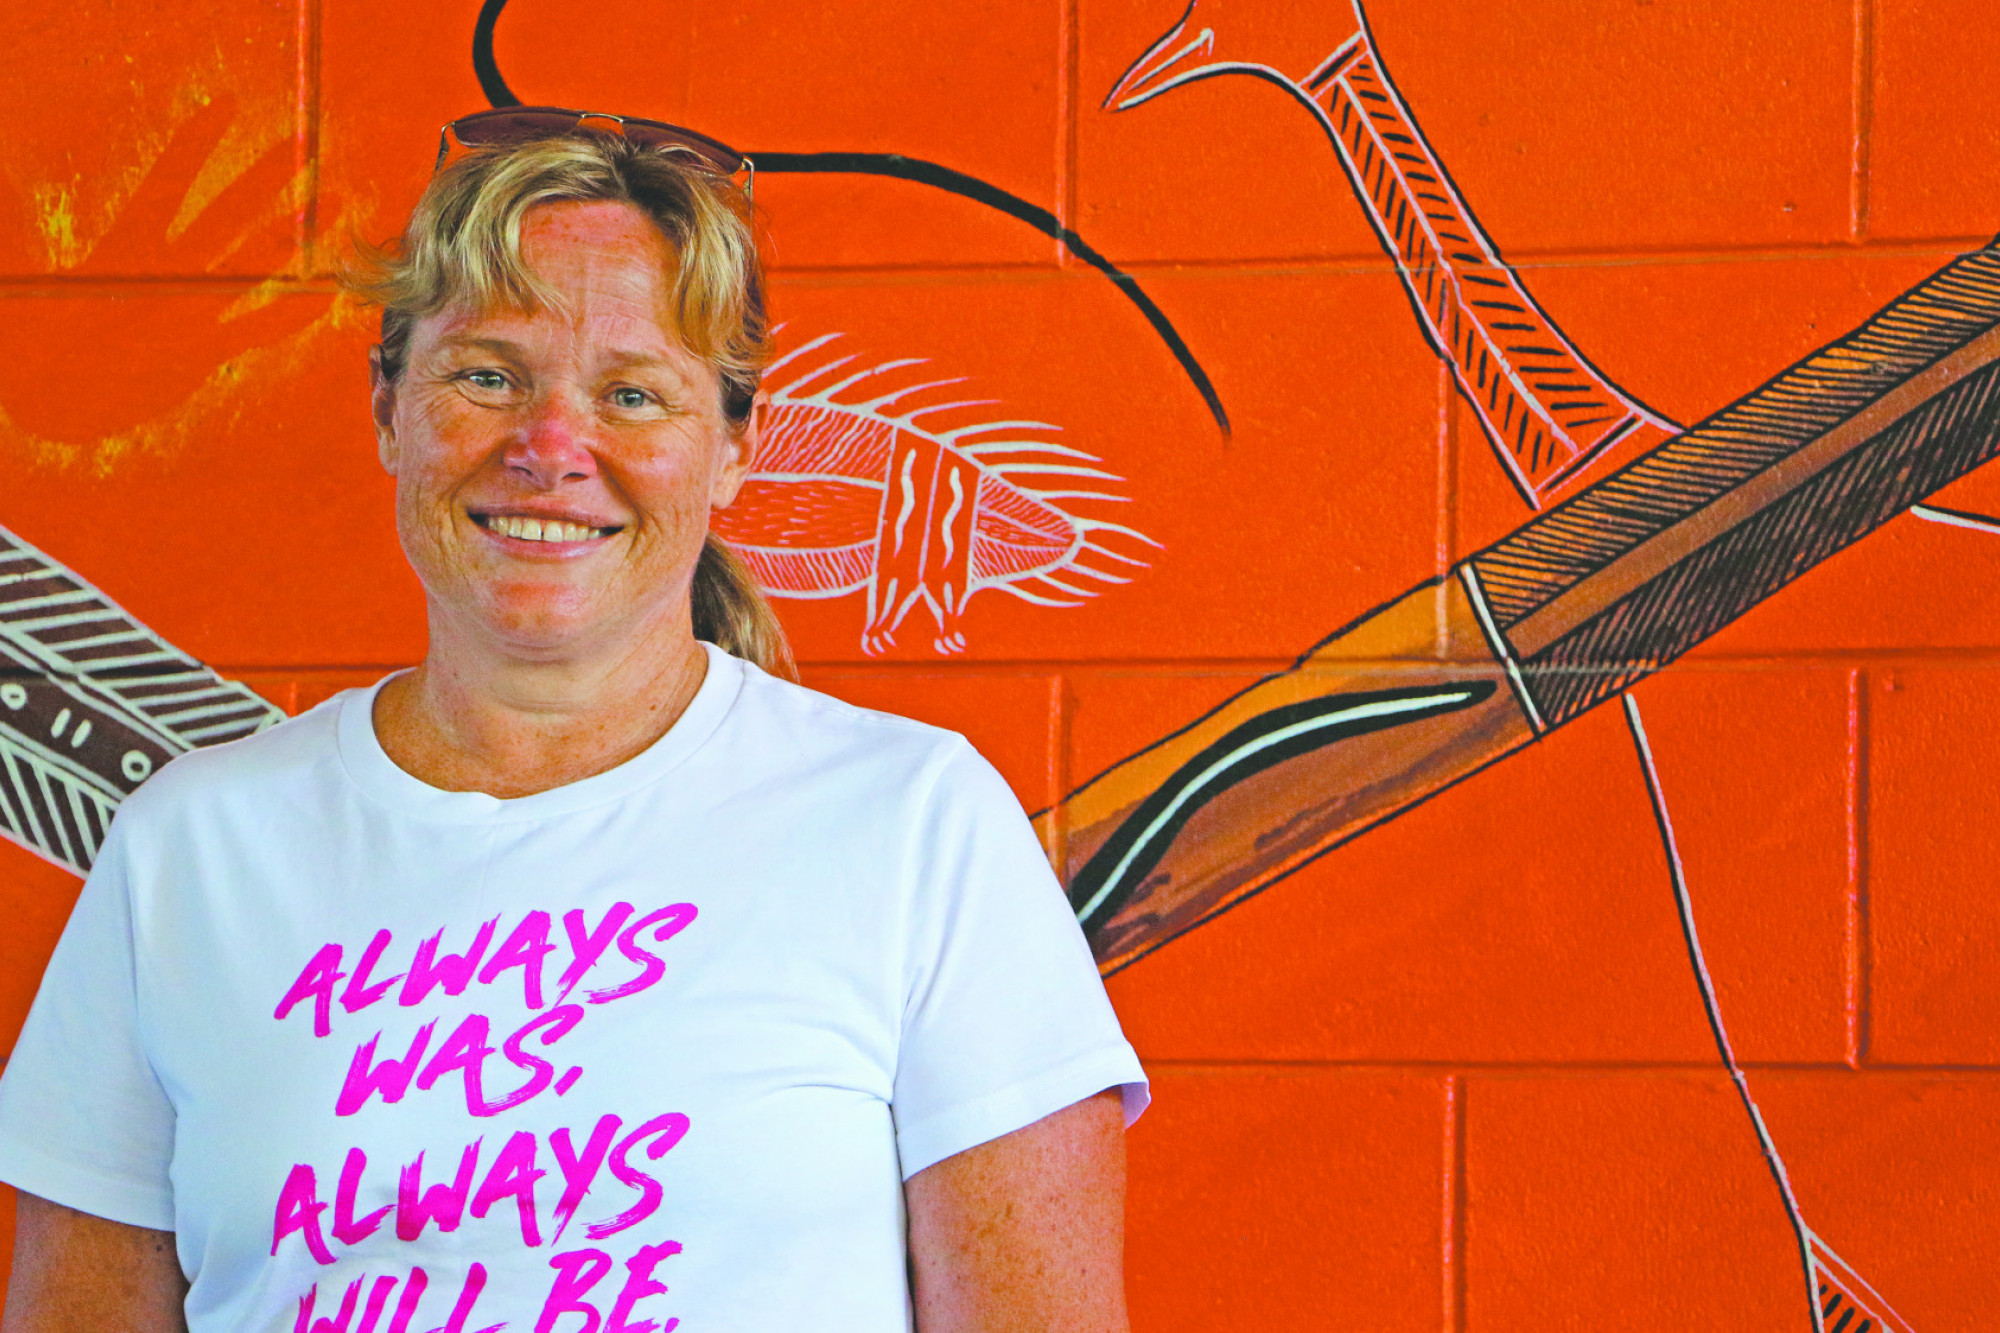 Extraordinary Programs See Teacher Recognised - feature photo